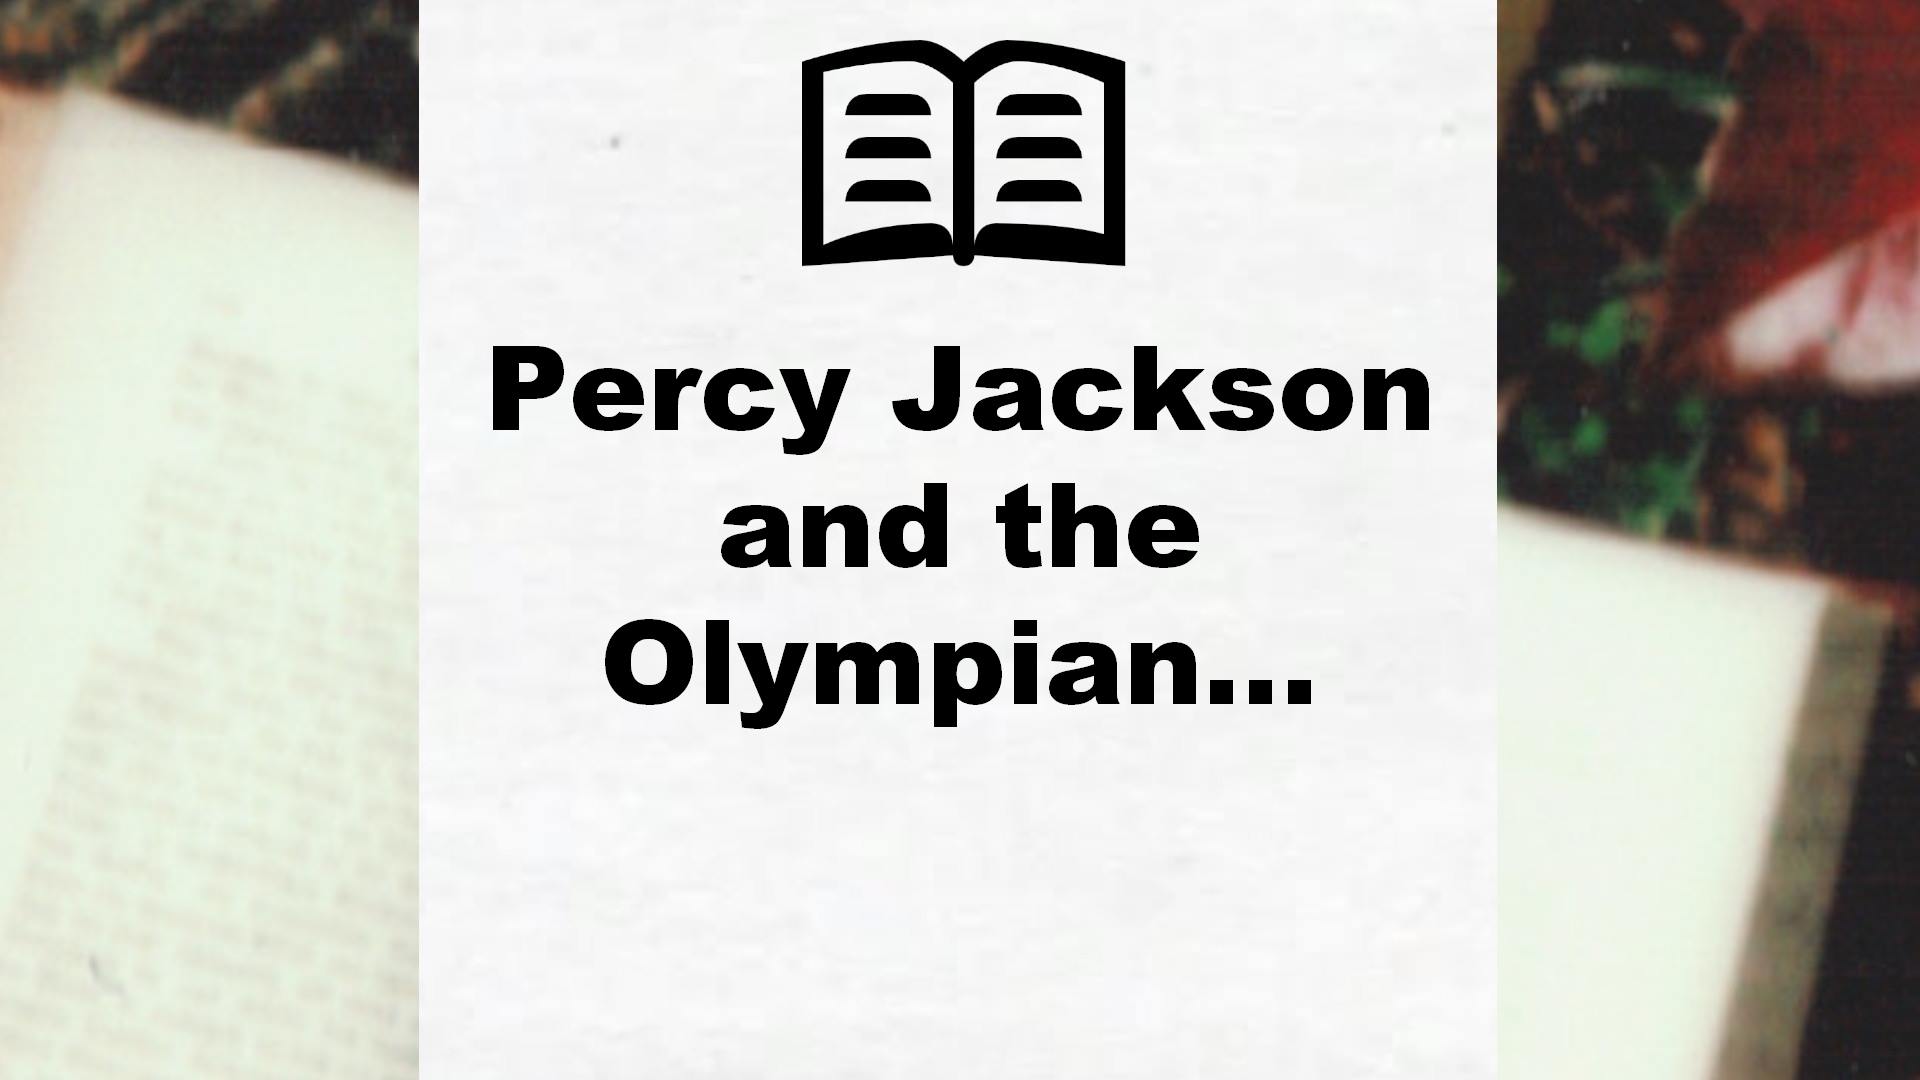 Percy Jackson and the Olympian… – Critique